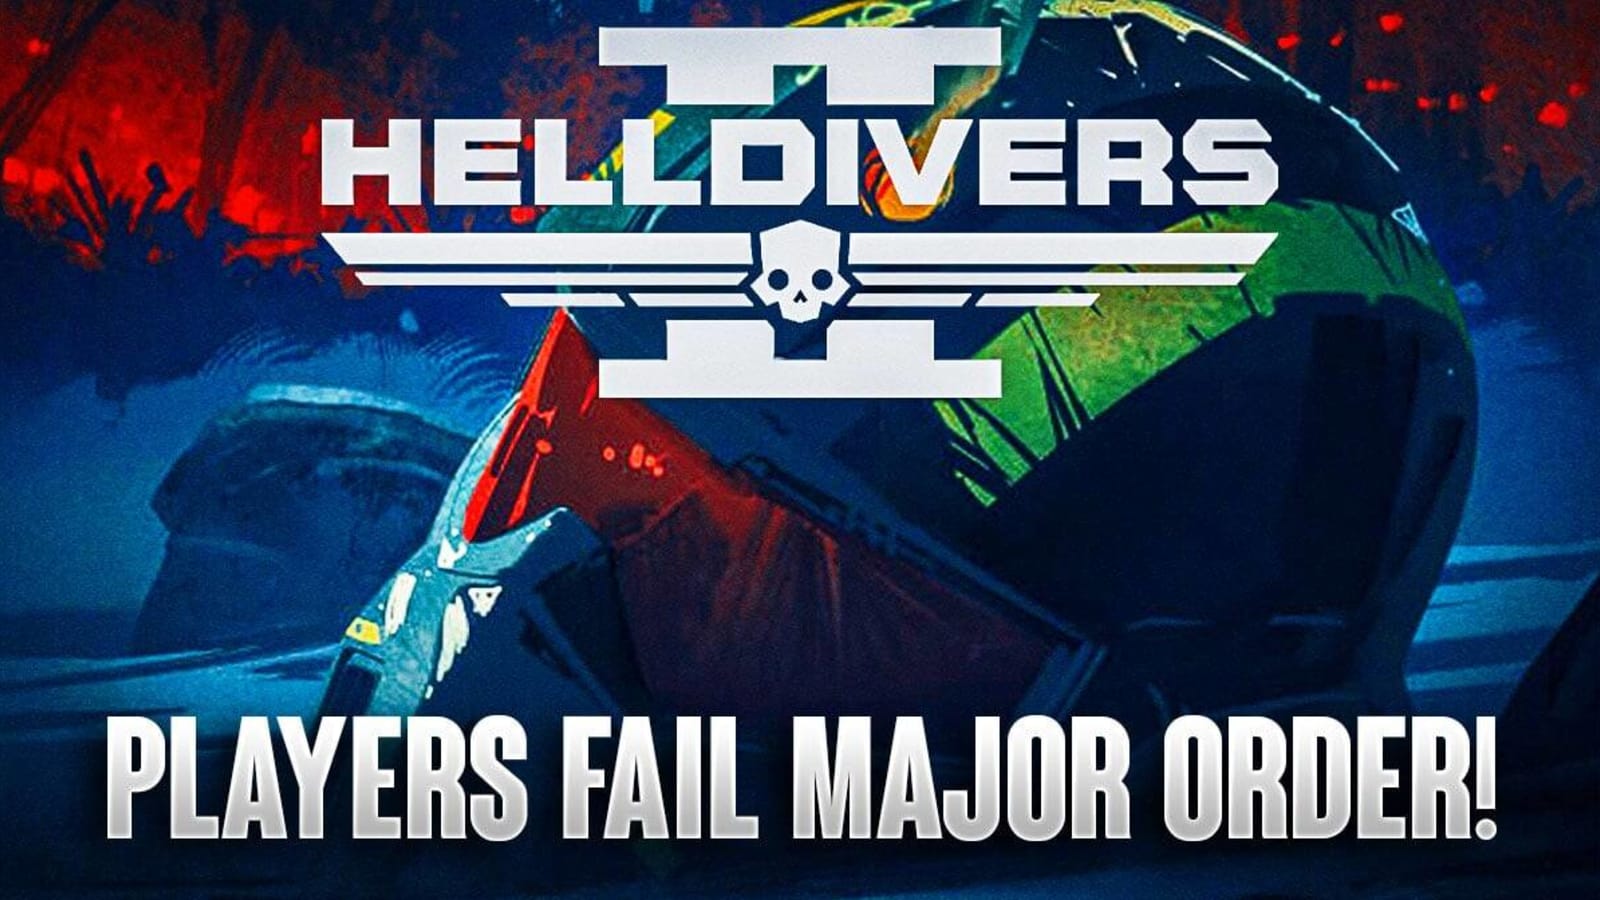 Helldivers 2 Players Fail Major Order, ‘The Second Galactic War’ Begins